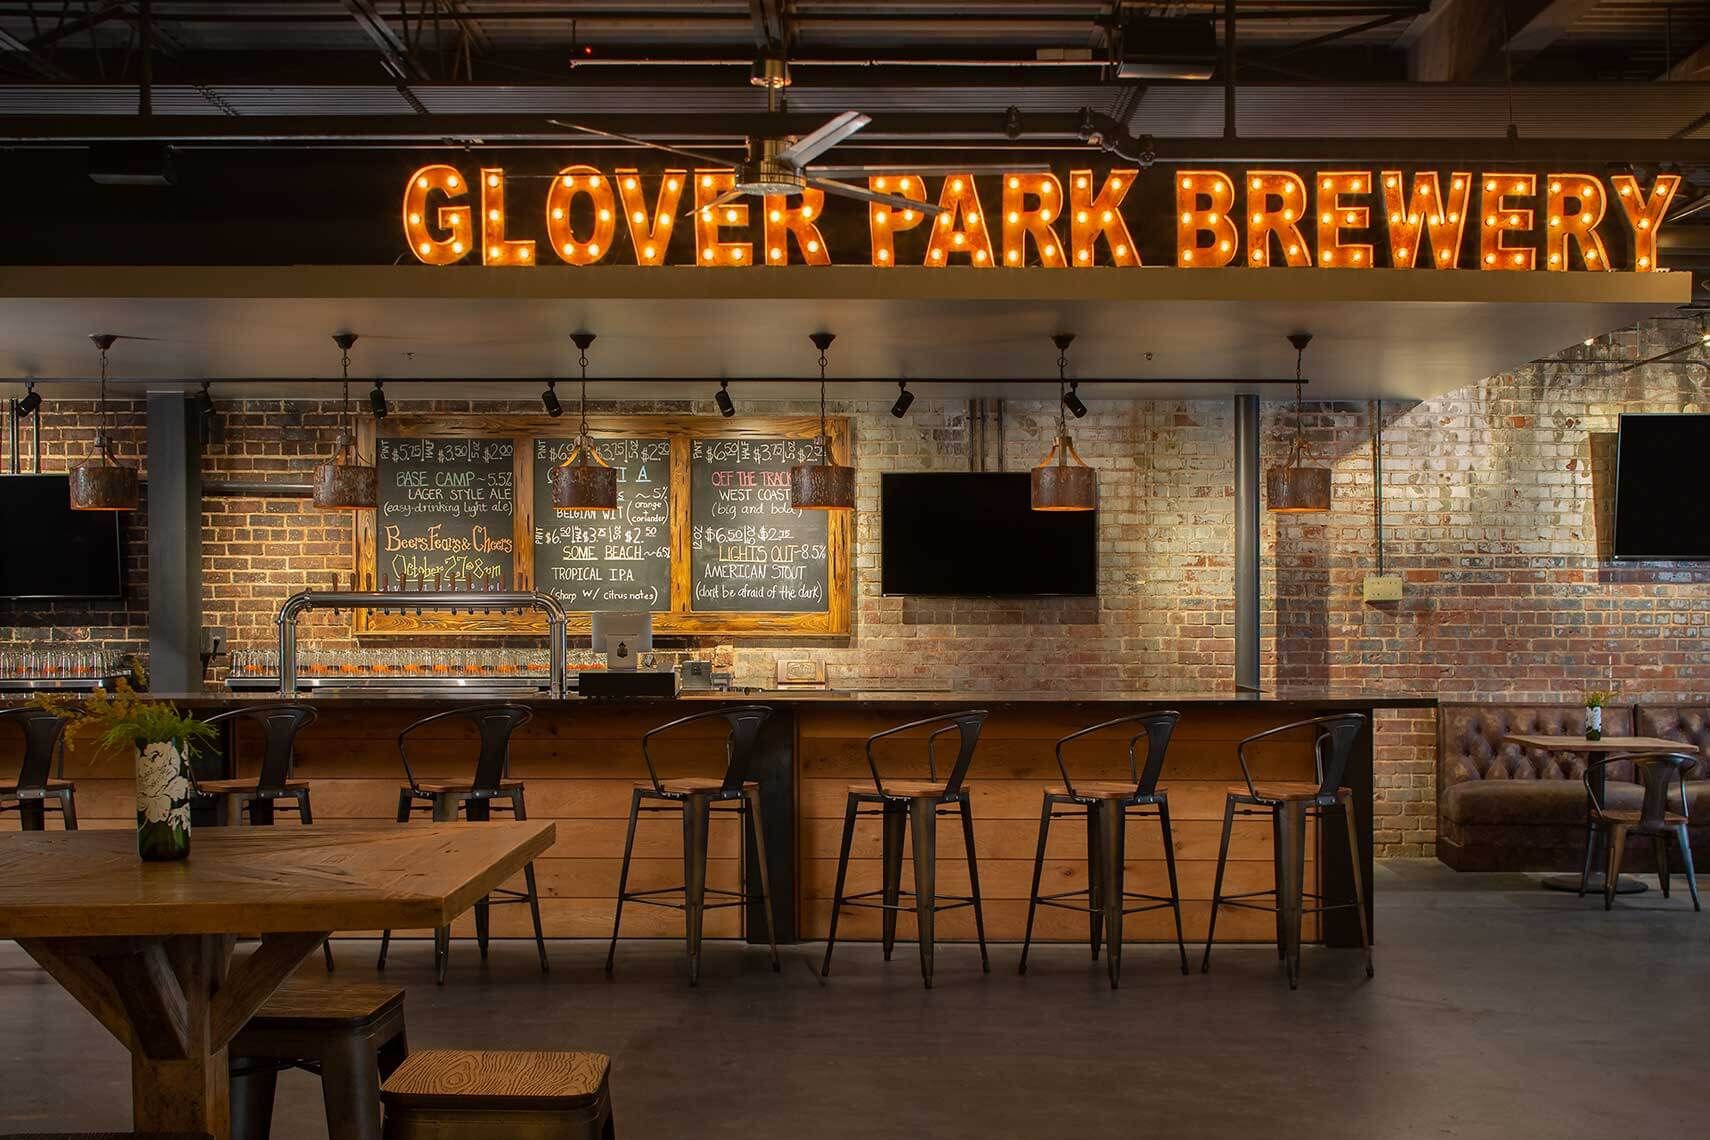 A view showing the main bar and surrounding seating at the Glover Park Brewery